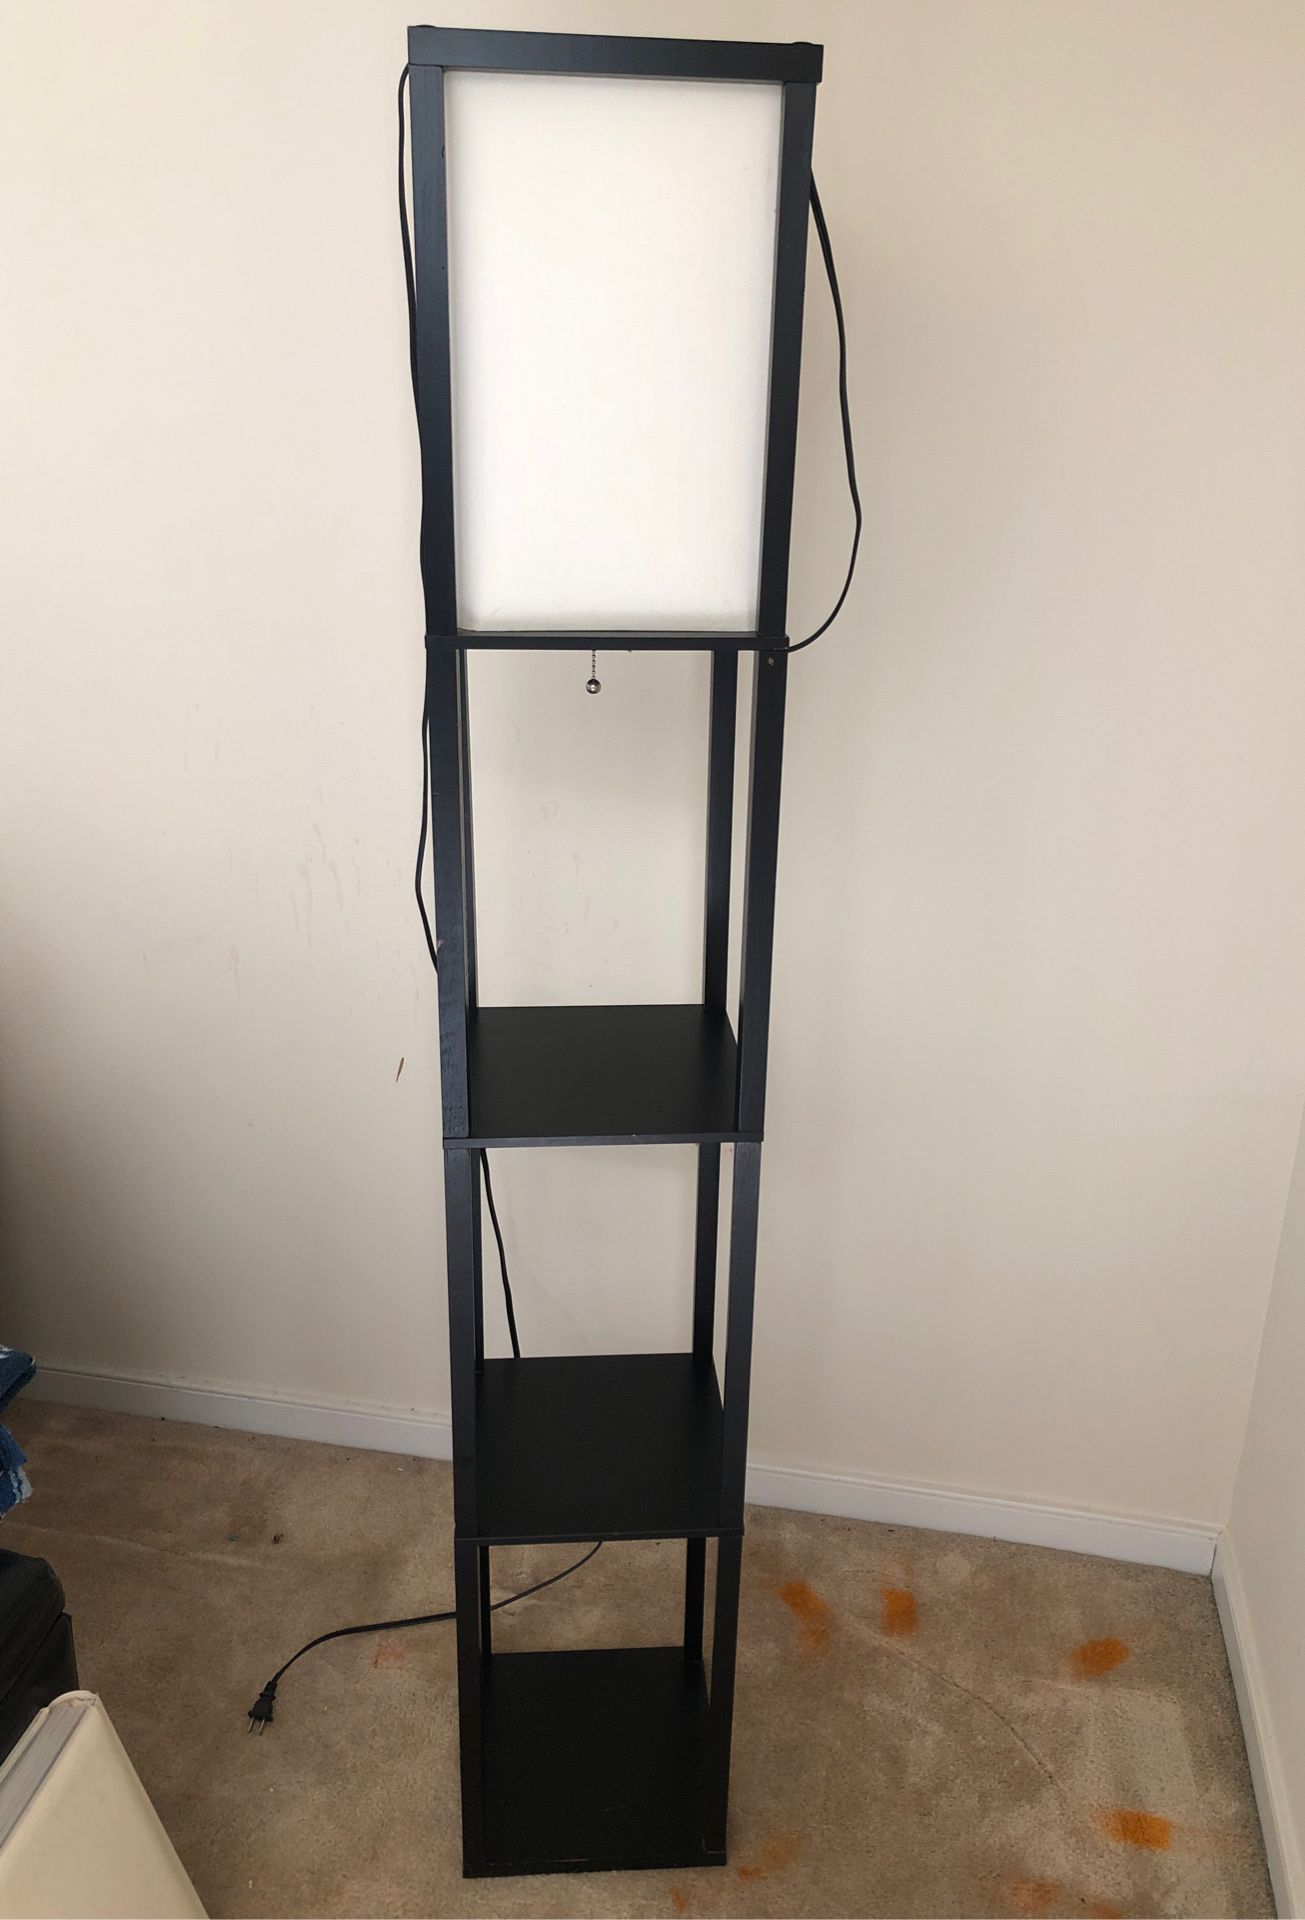 Tall floor lamp with shelves